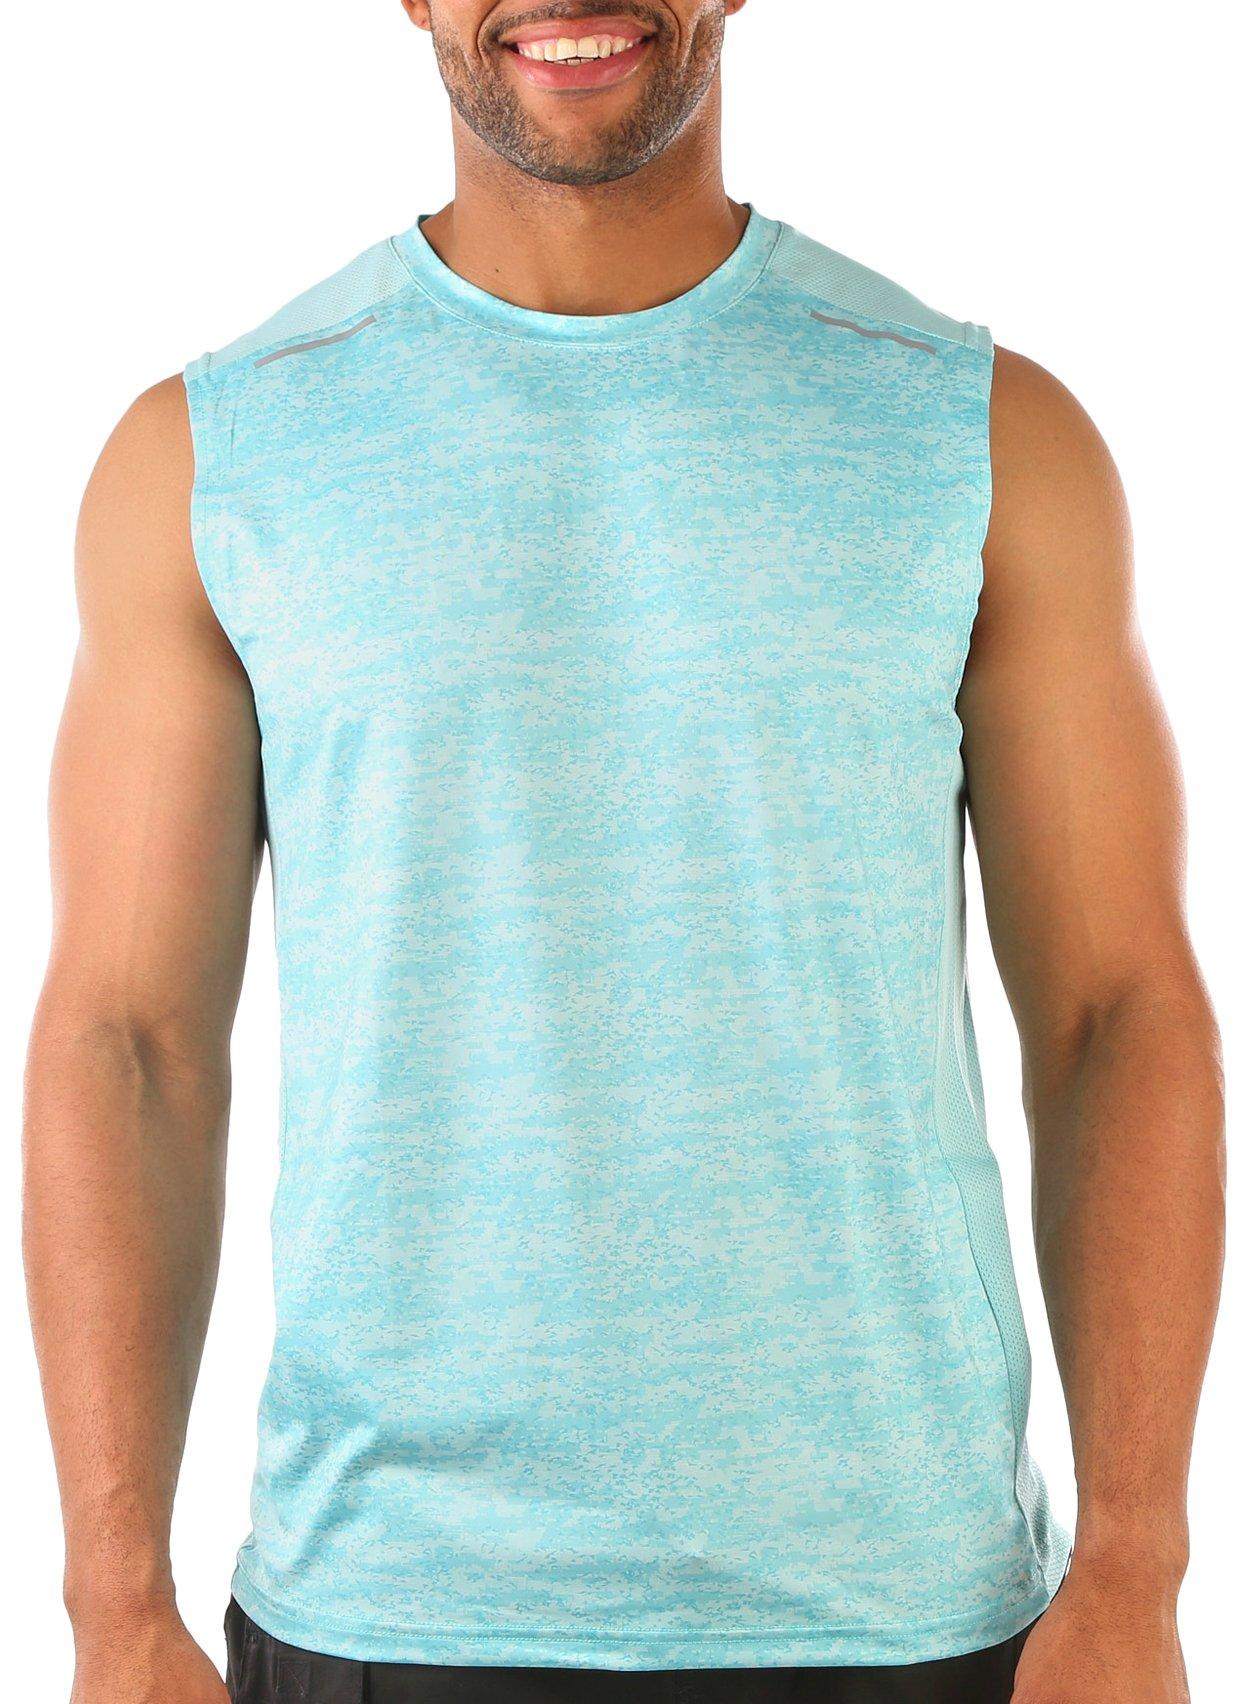 Mens Performance Camo Print Vented Muscle Tank